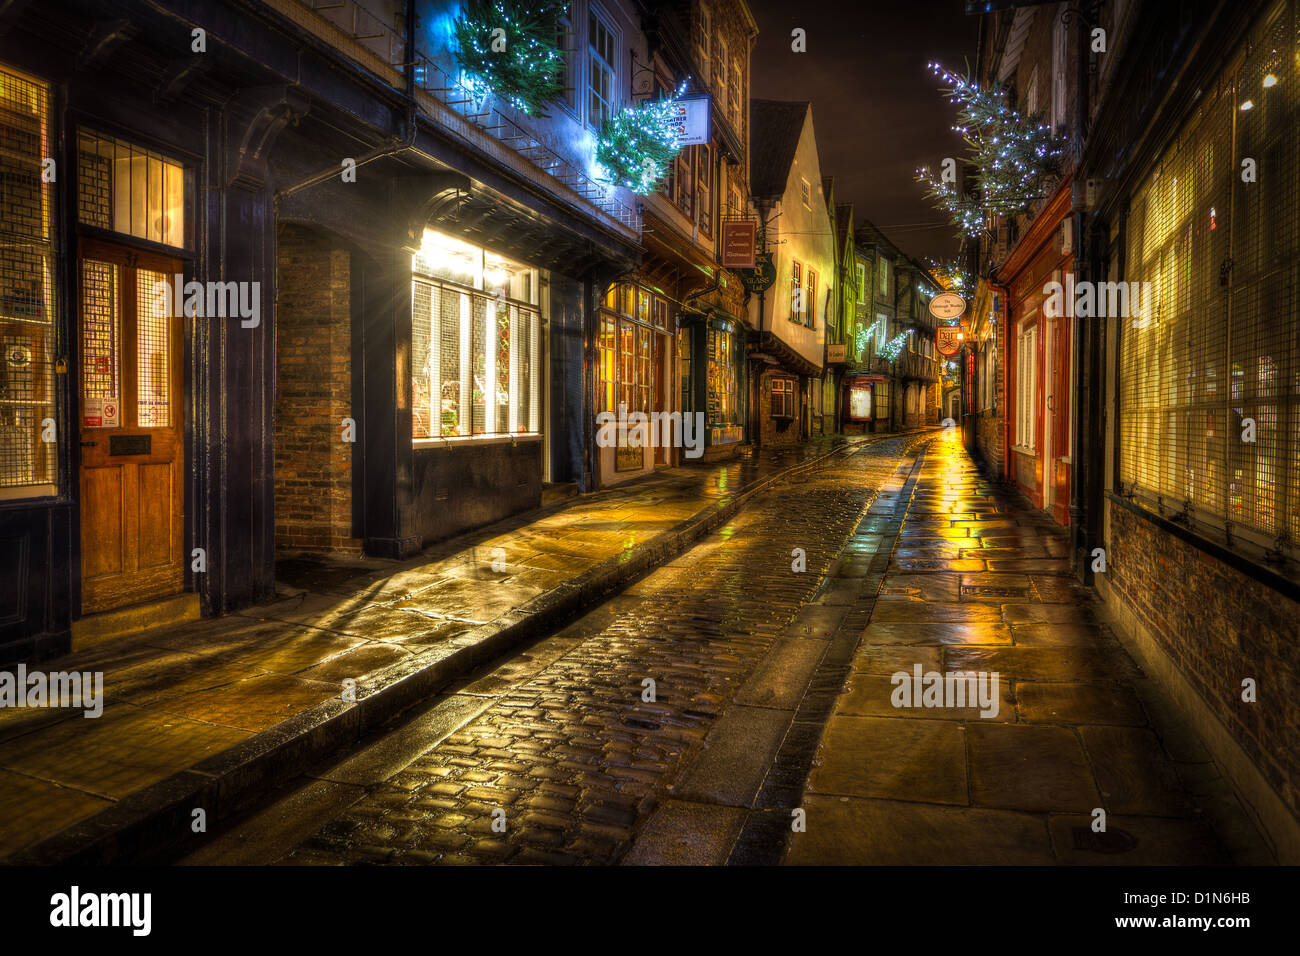 The Shambles in York at Christmas time at night Stock Photo